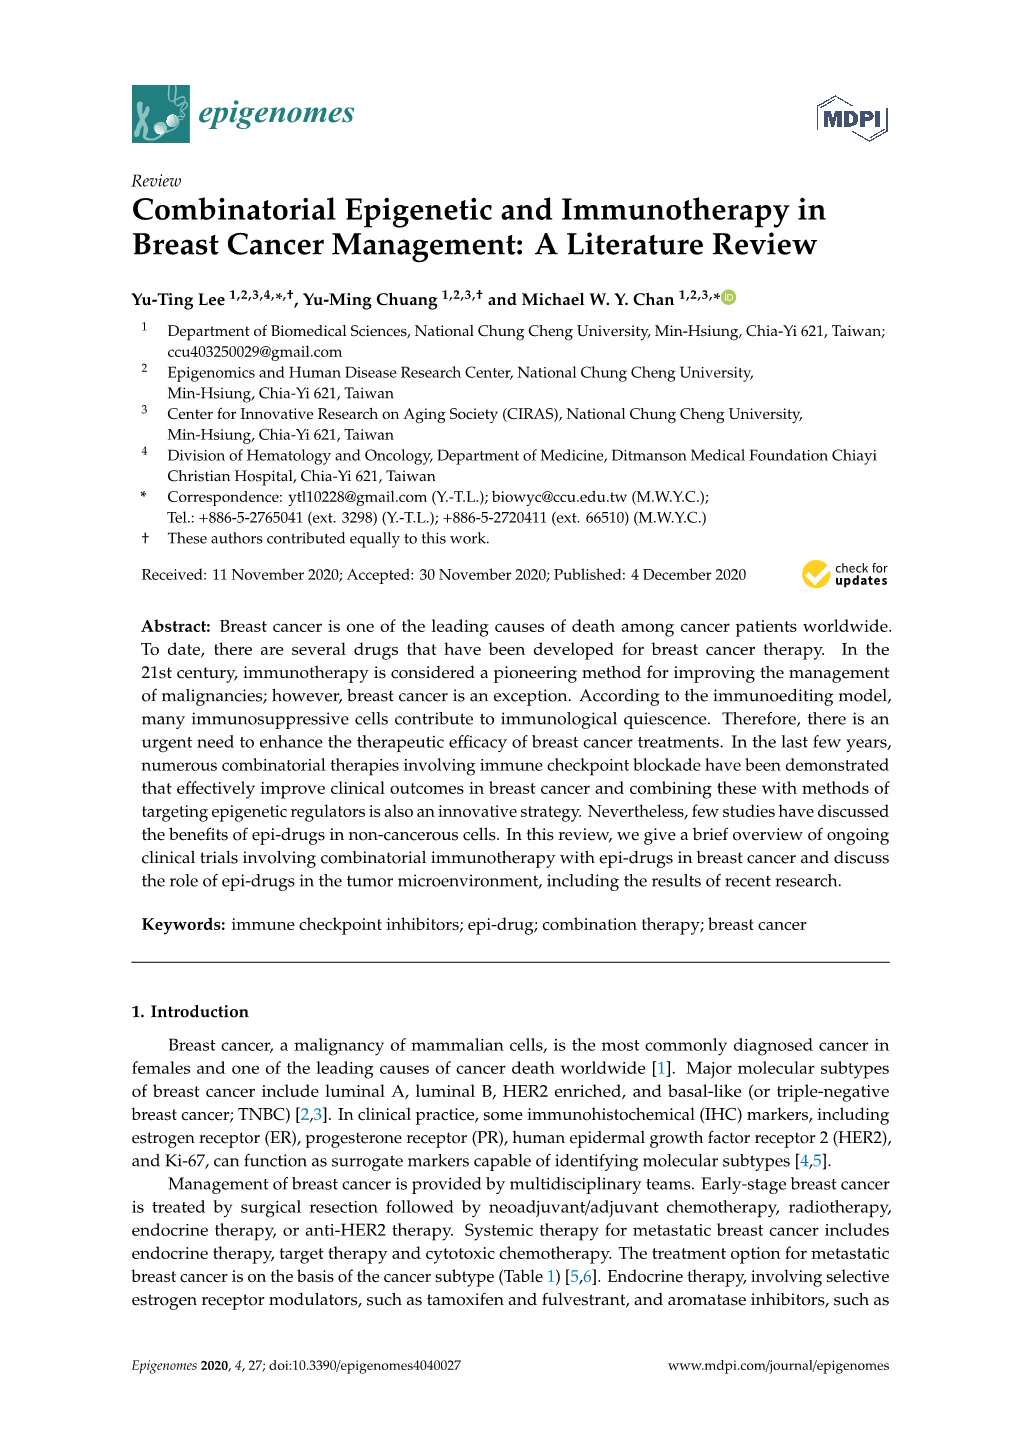 Combinatorial Epigenetic and Immunotherapy in Breast Cancer Management: a Literature Review